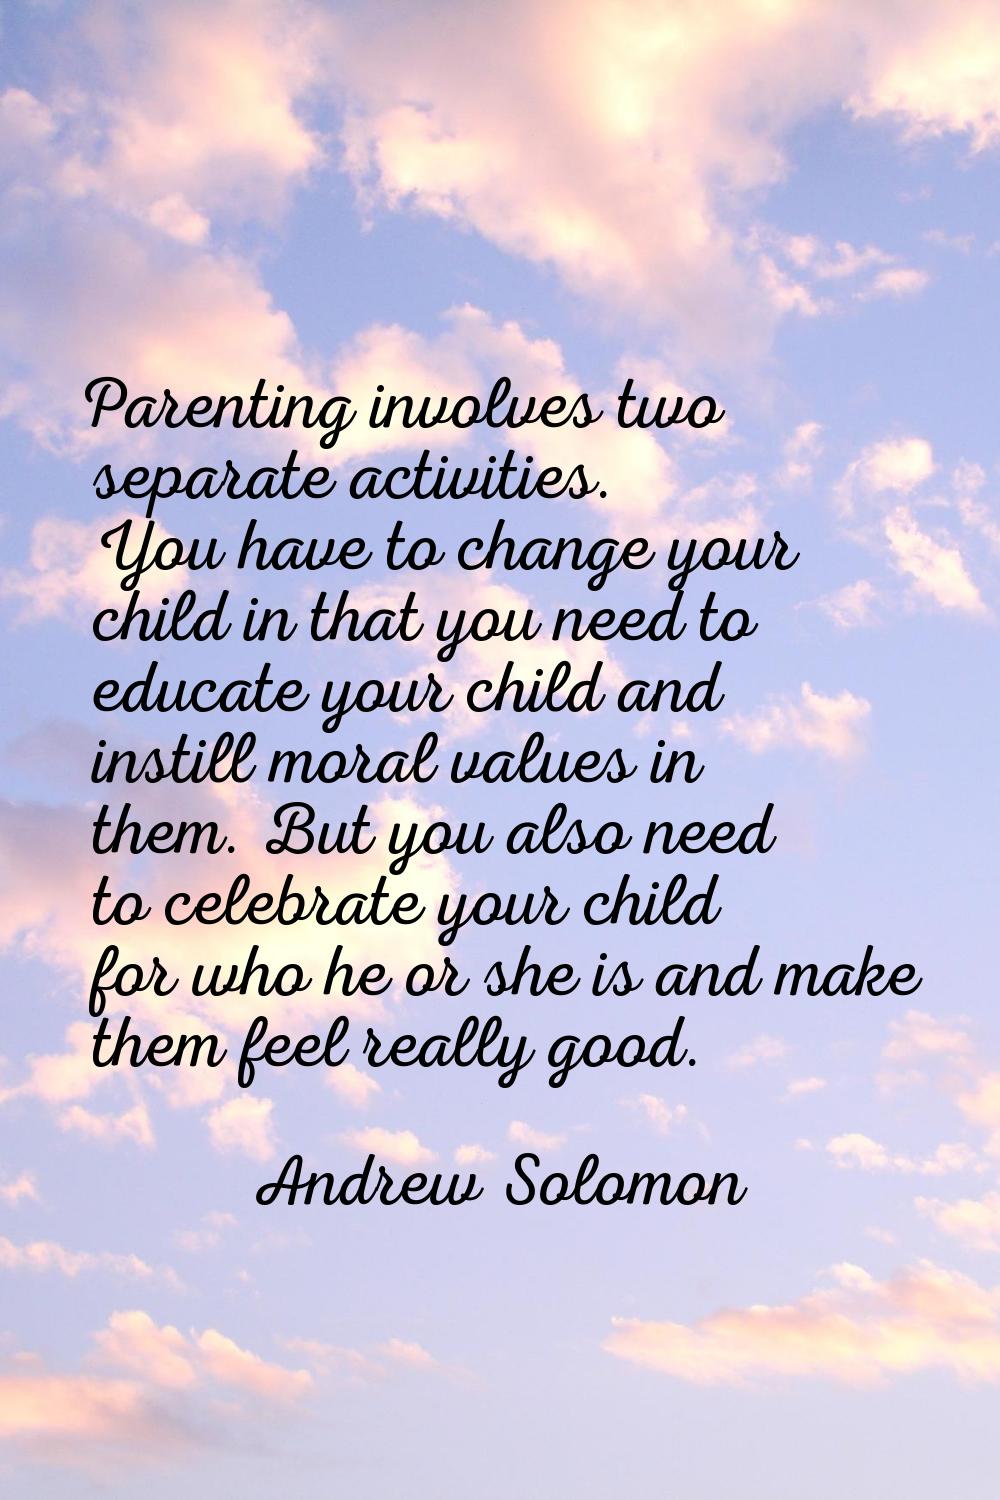 Parenting involves two separate activities. You have to change your child in that you need to educa